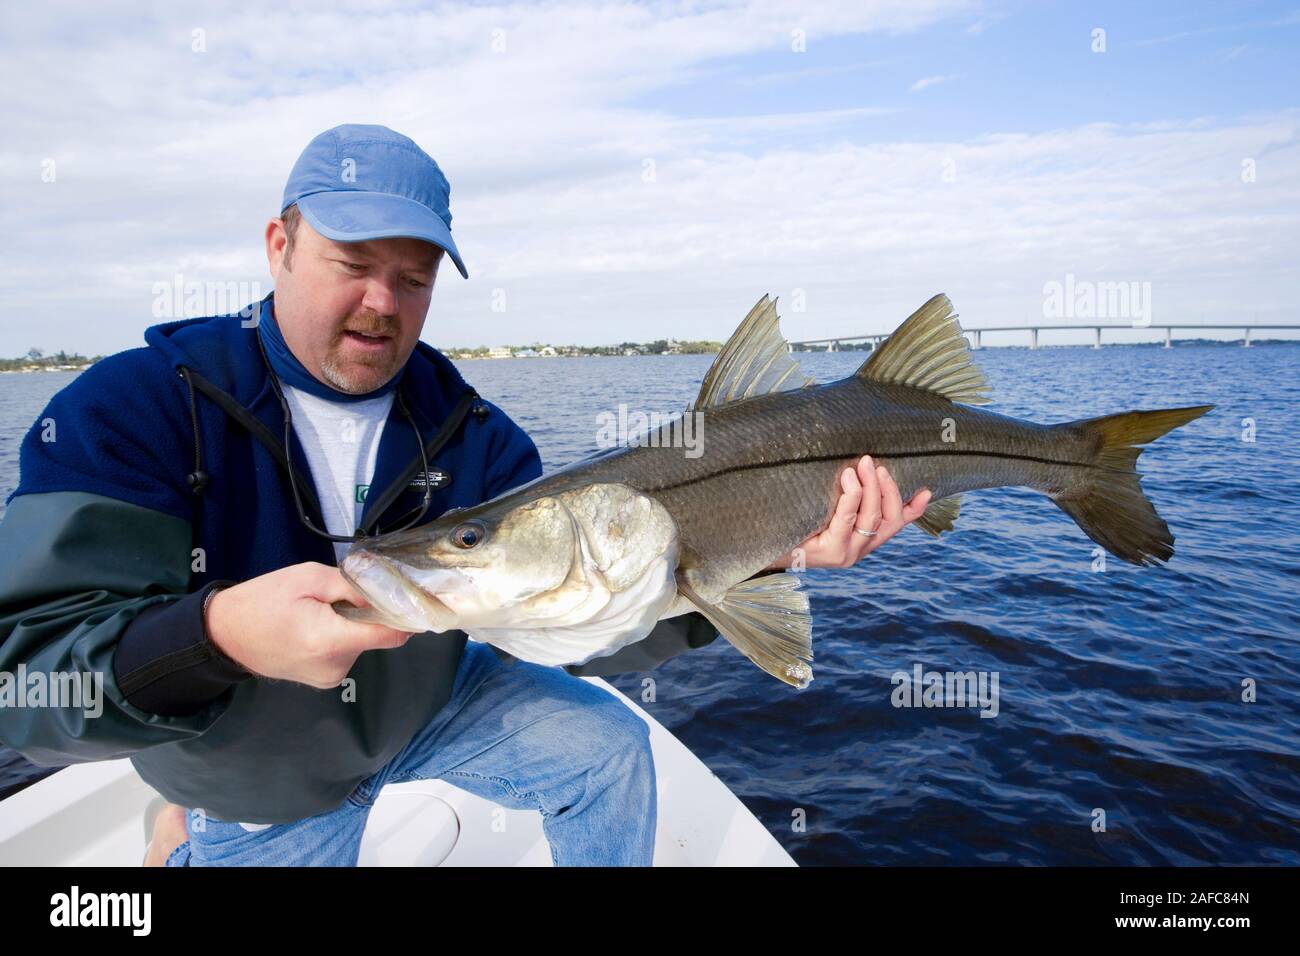 Man with snook fish caught in Stuart, Florida, USA. Model Released. Stock Photo